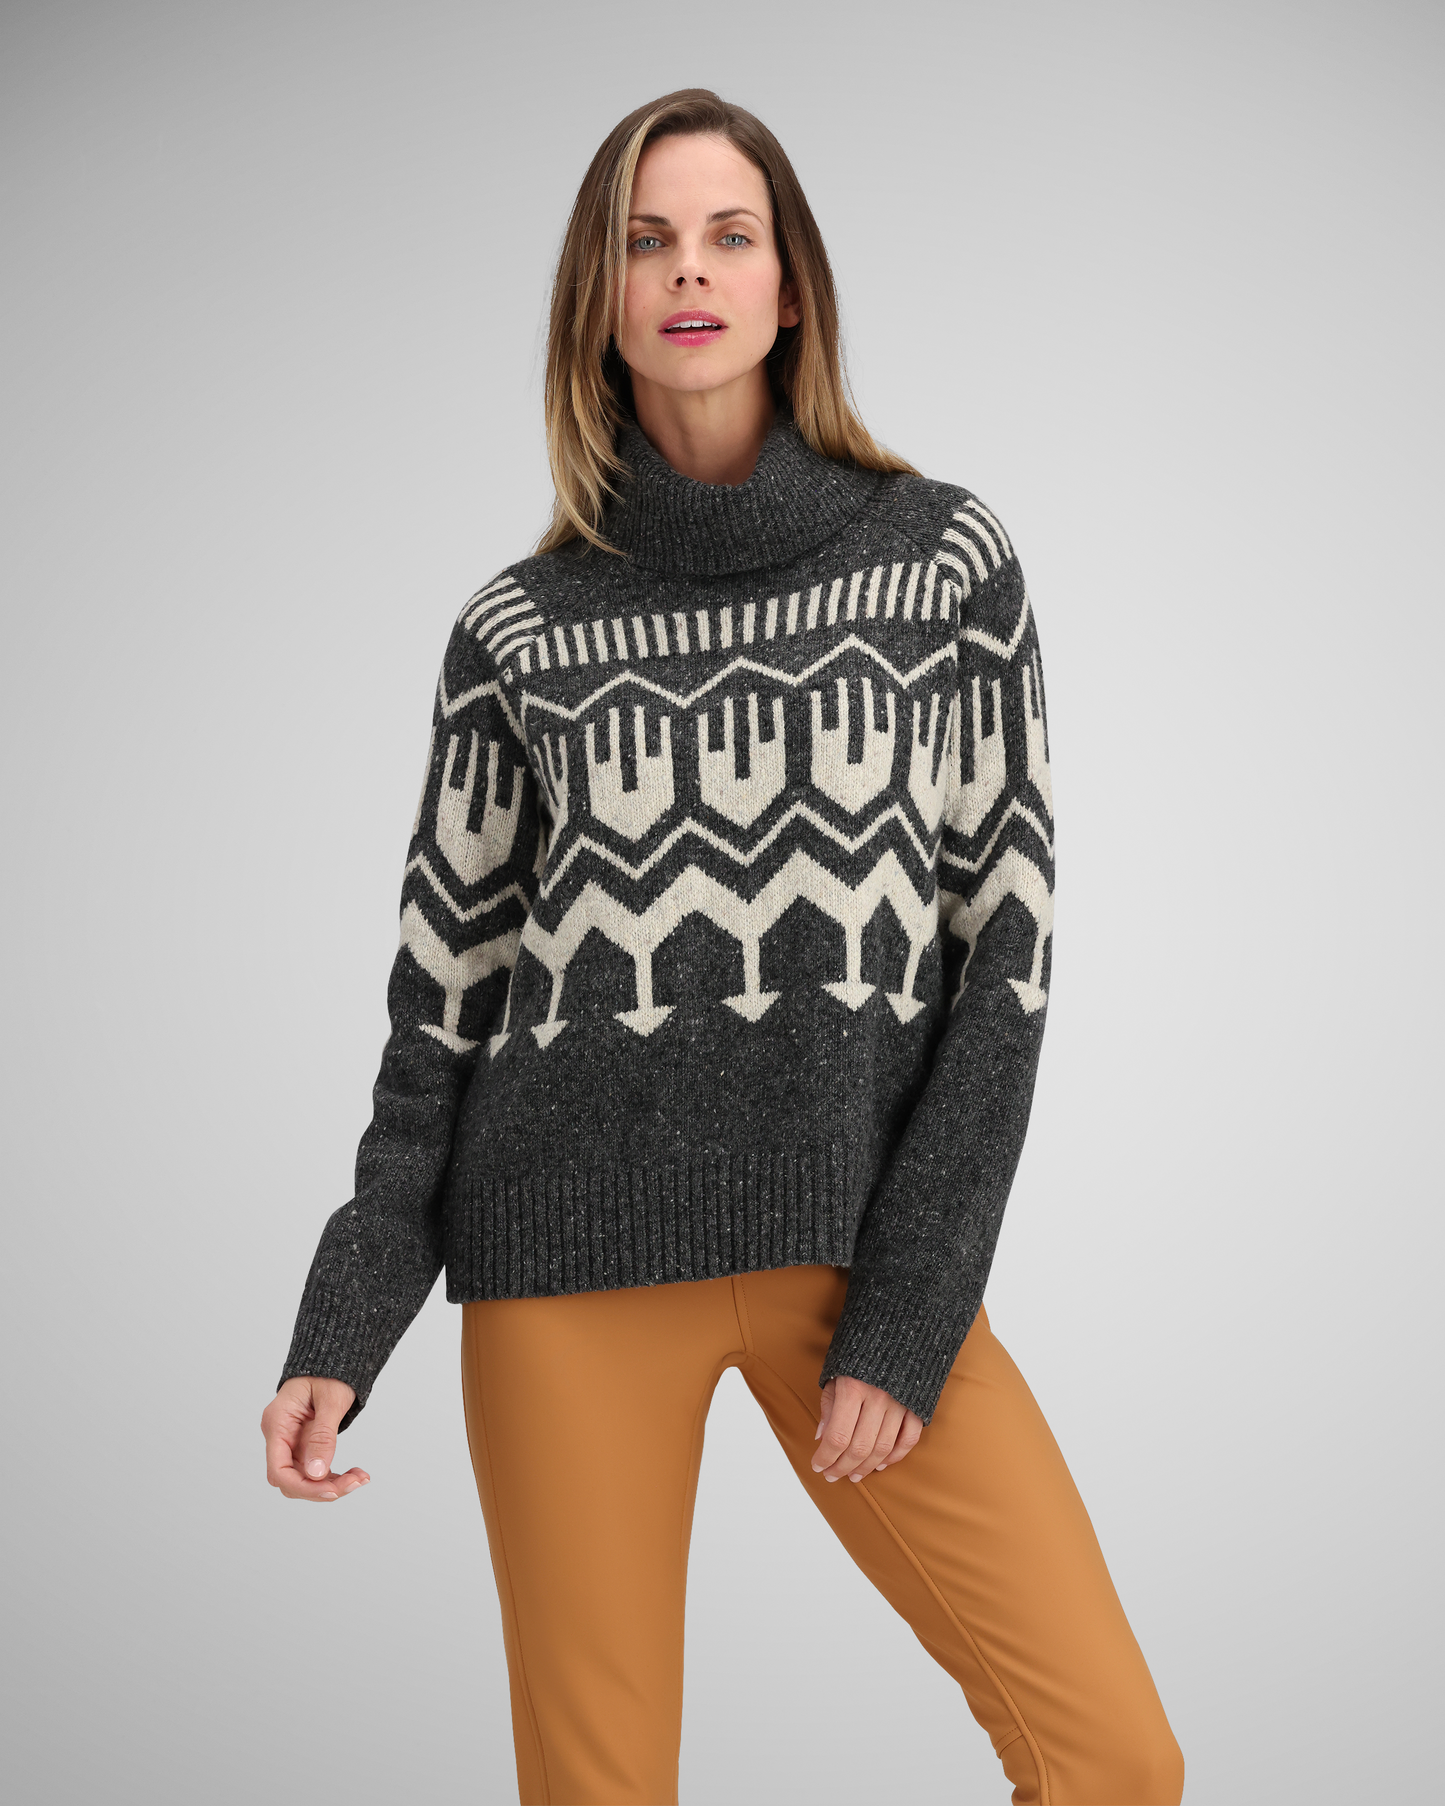 Coutures inversees turtleneck sweater